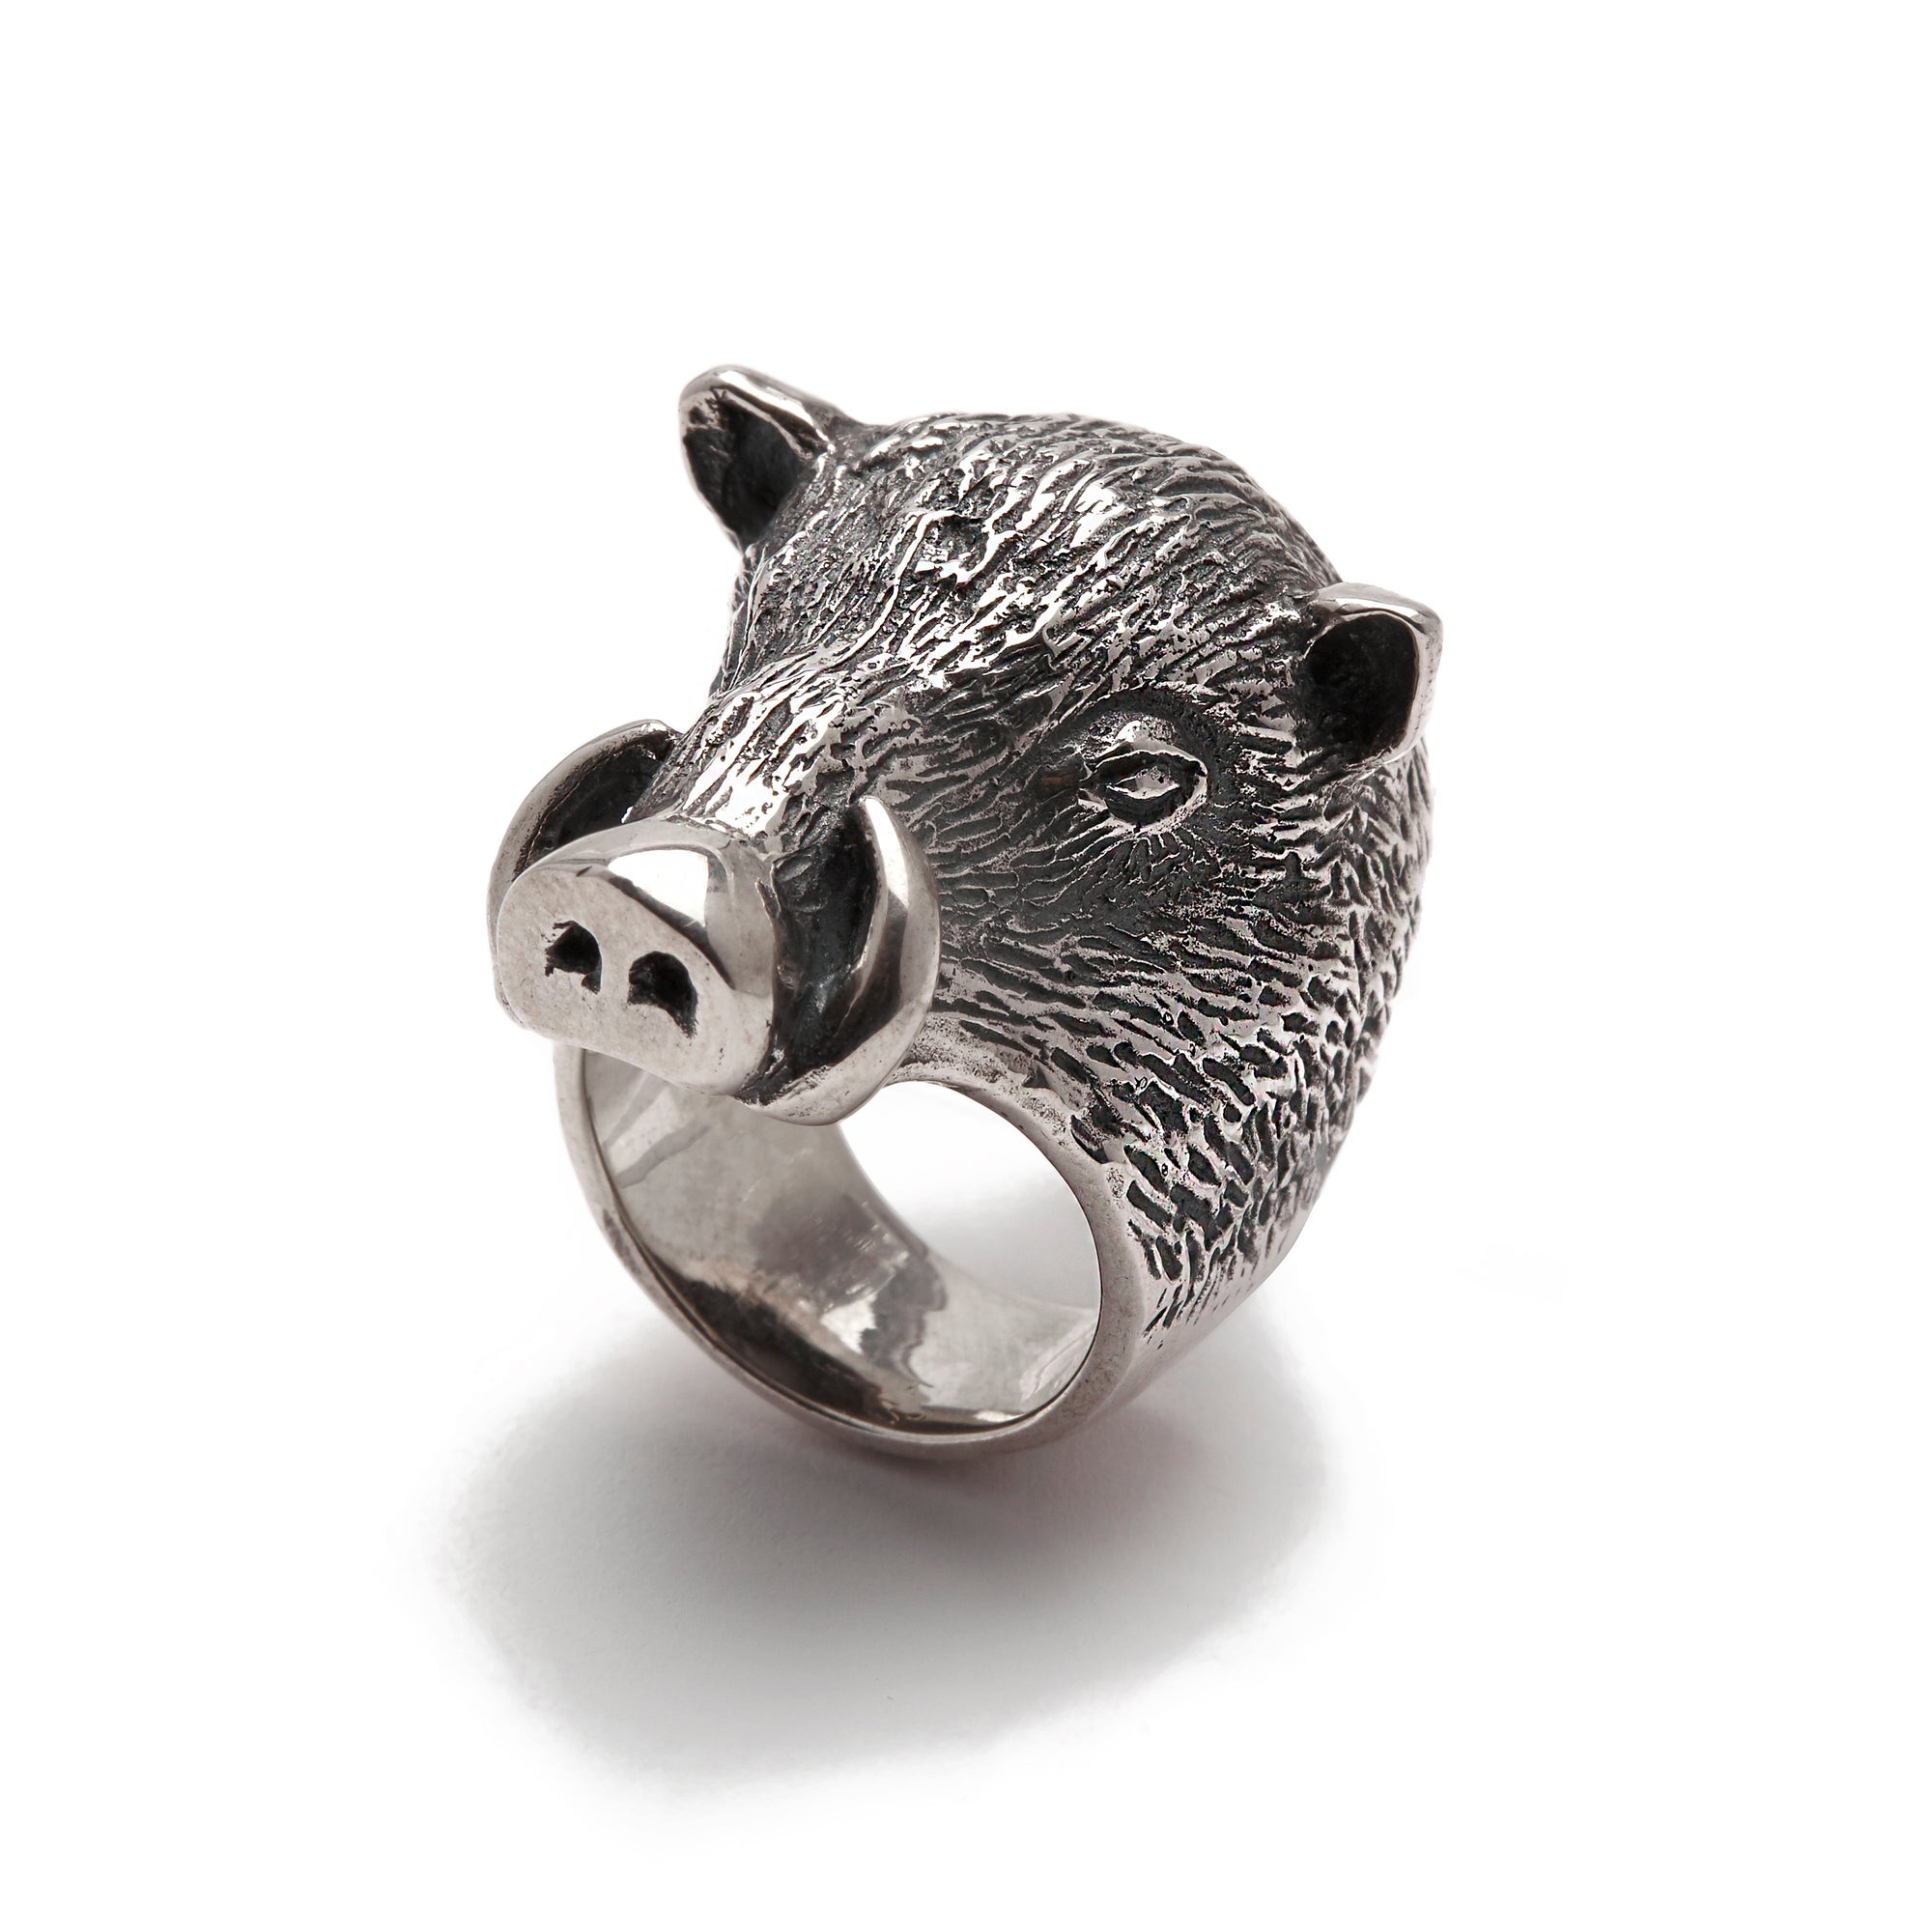 The Great Frog - Wild Boar Ring view 2